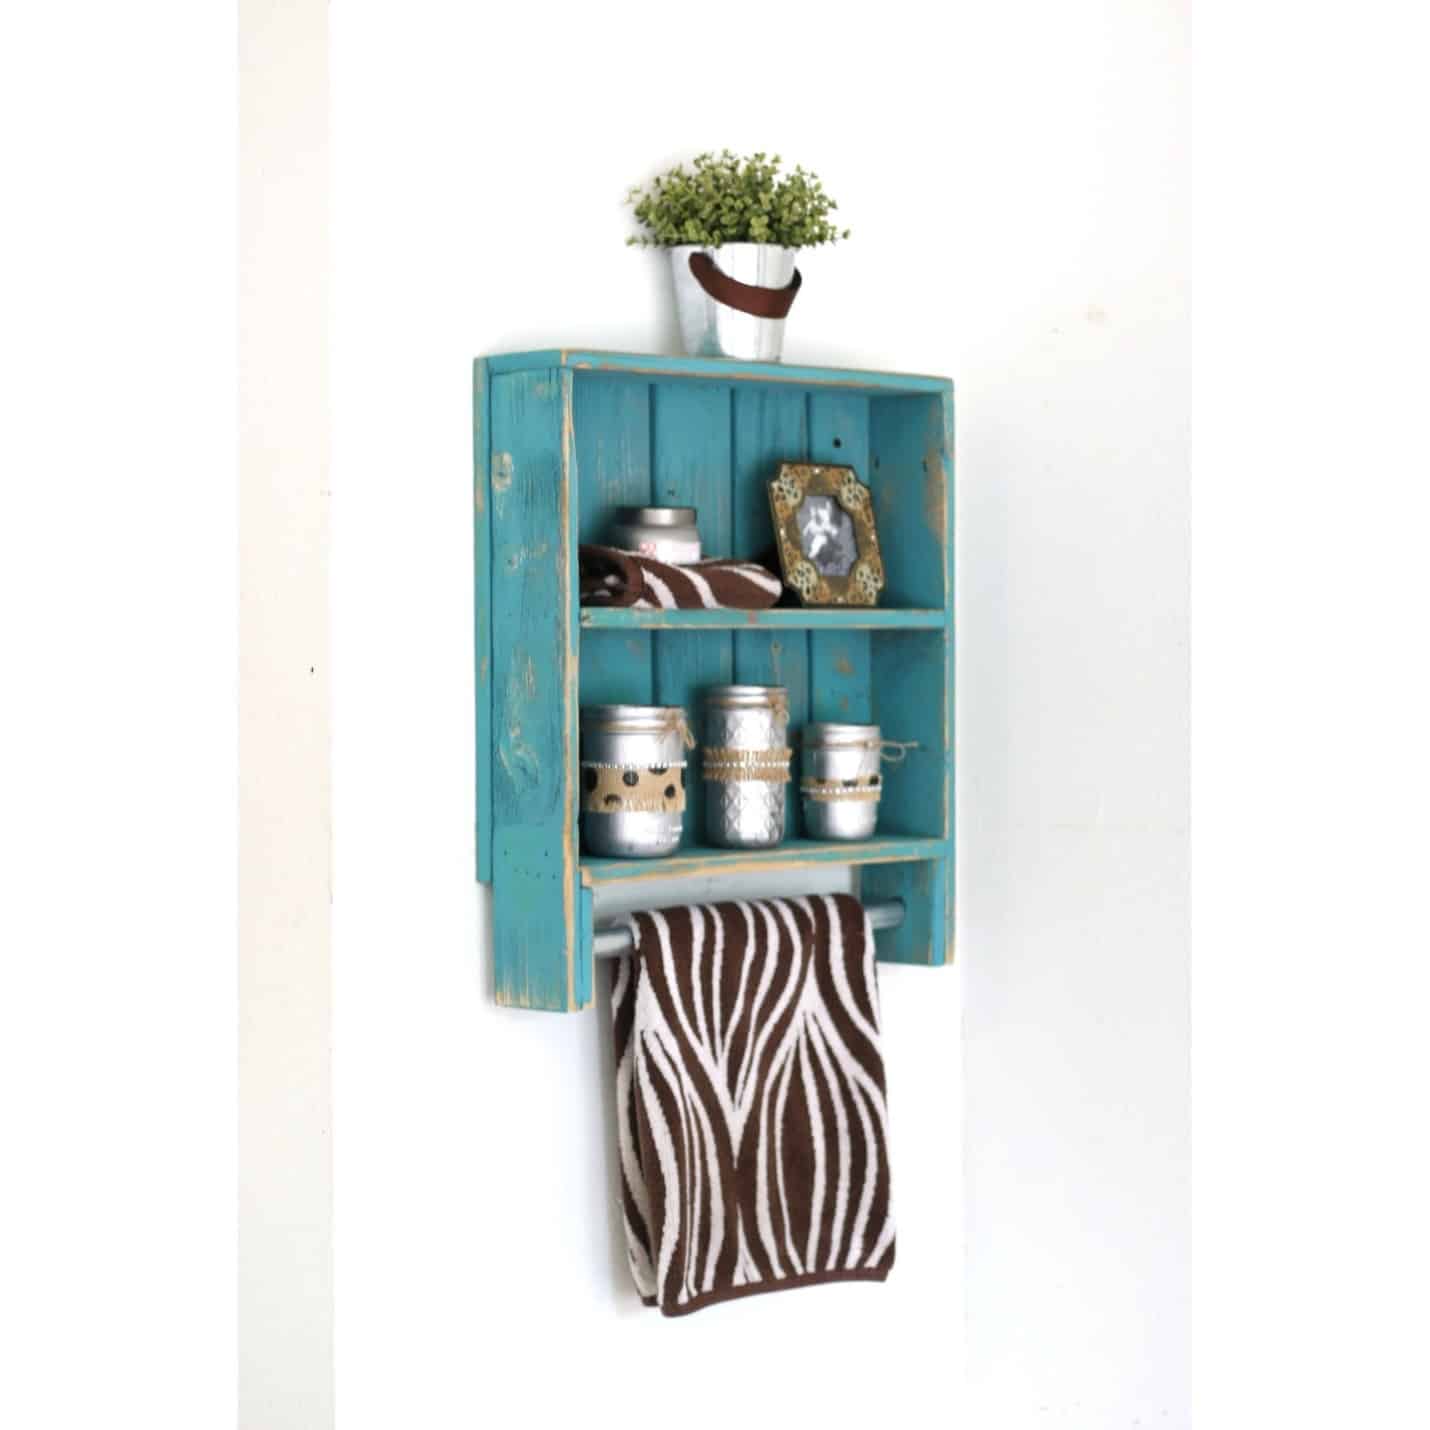 Decorate With A Reclaimed Wood Toiletry Rack (With Towel Bar)